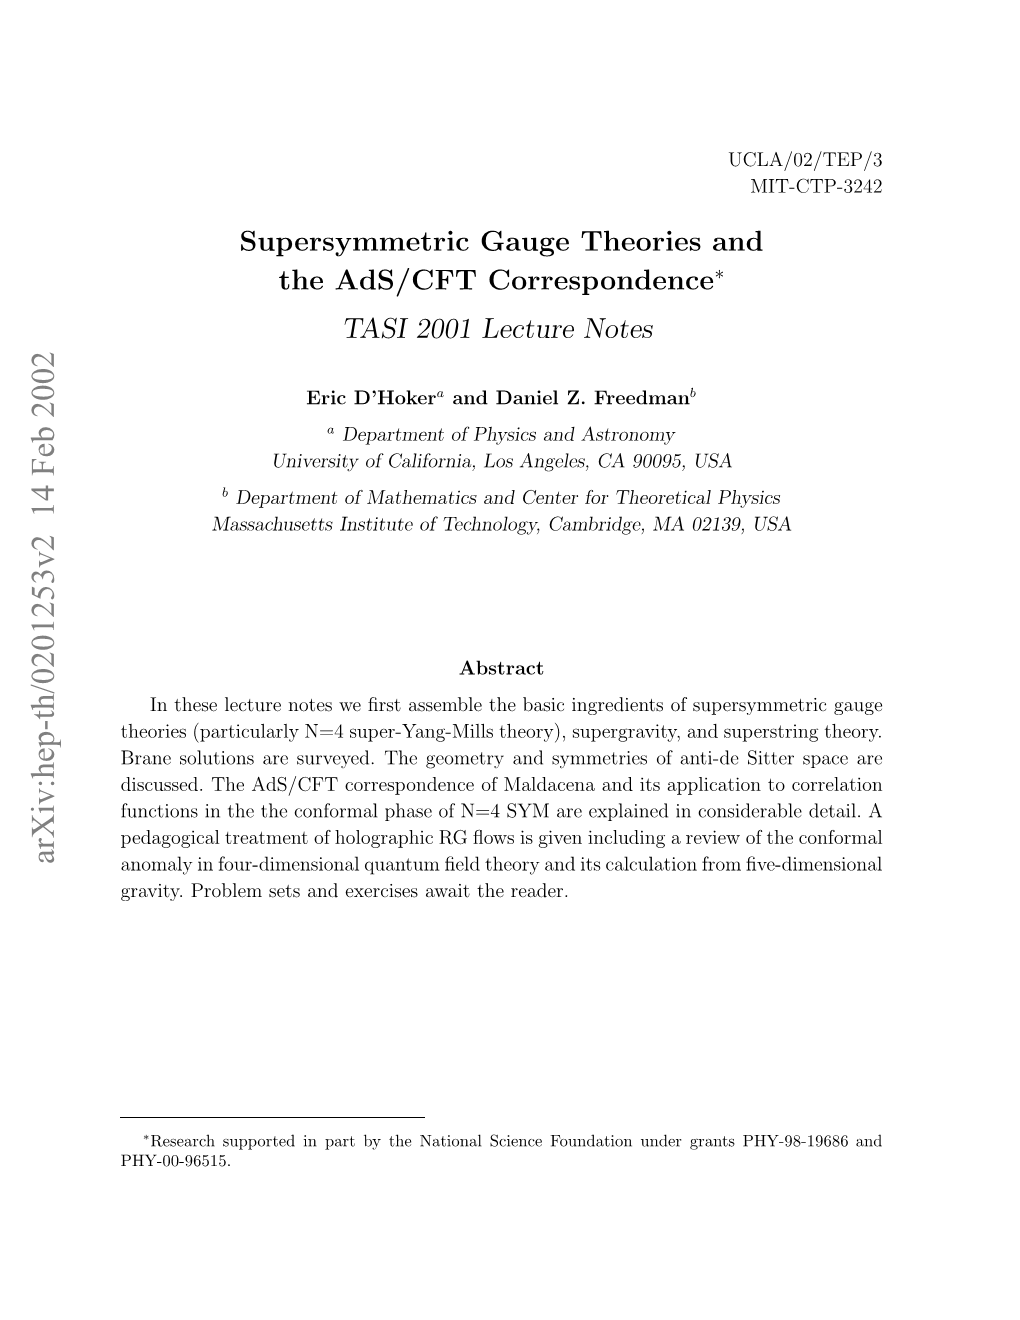 Supersymmetric Gauge Theories and the Ads/CFT Correspondence